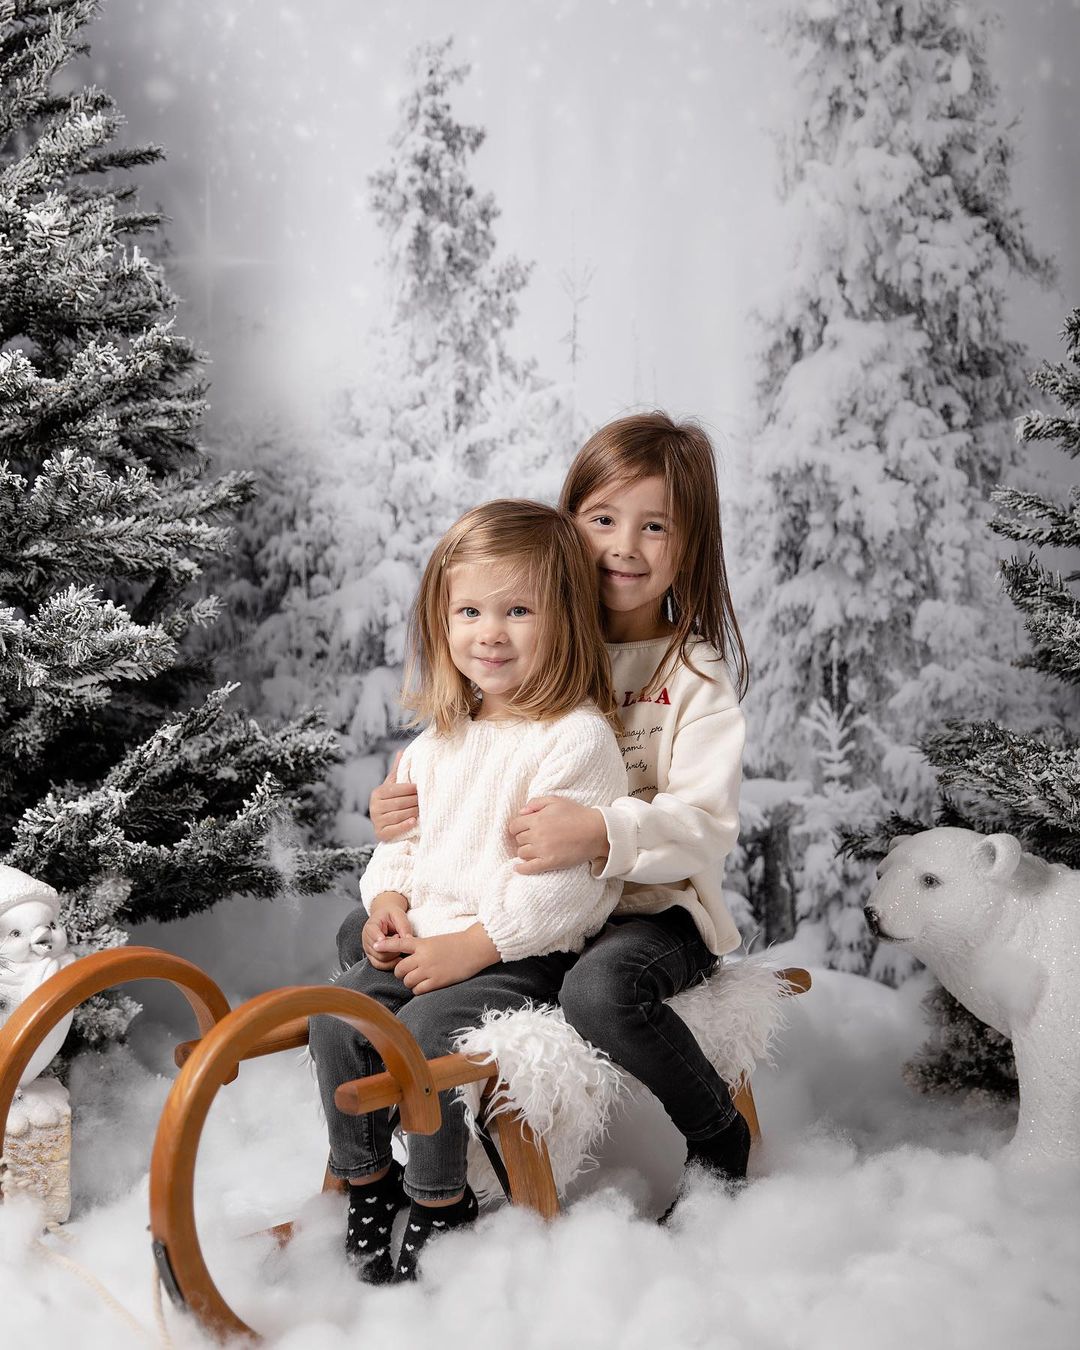 Kate Winter Snow Forest Backdrops For Photography